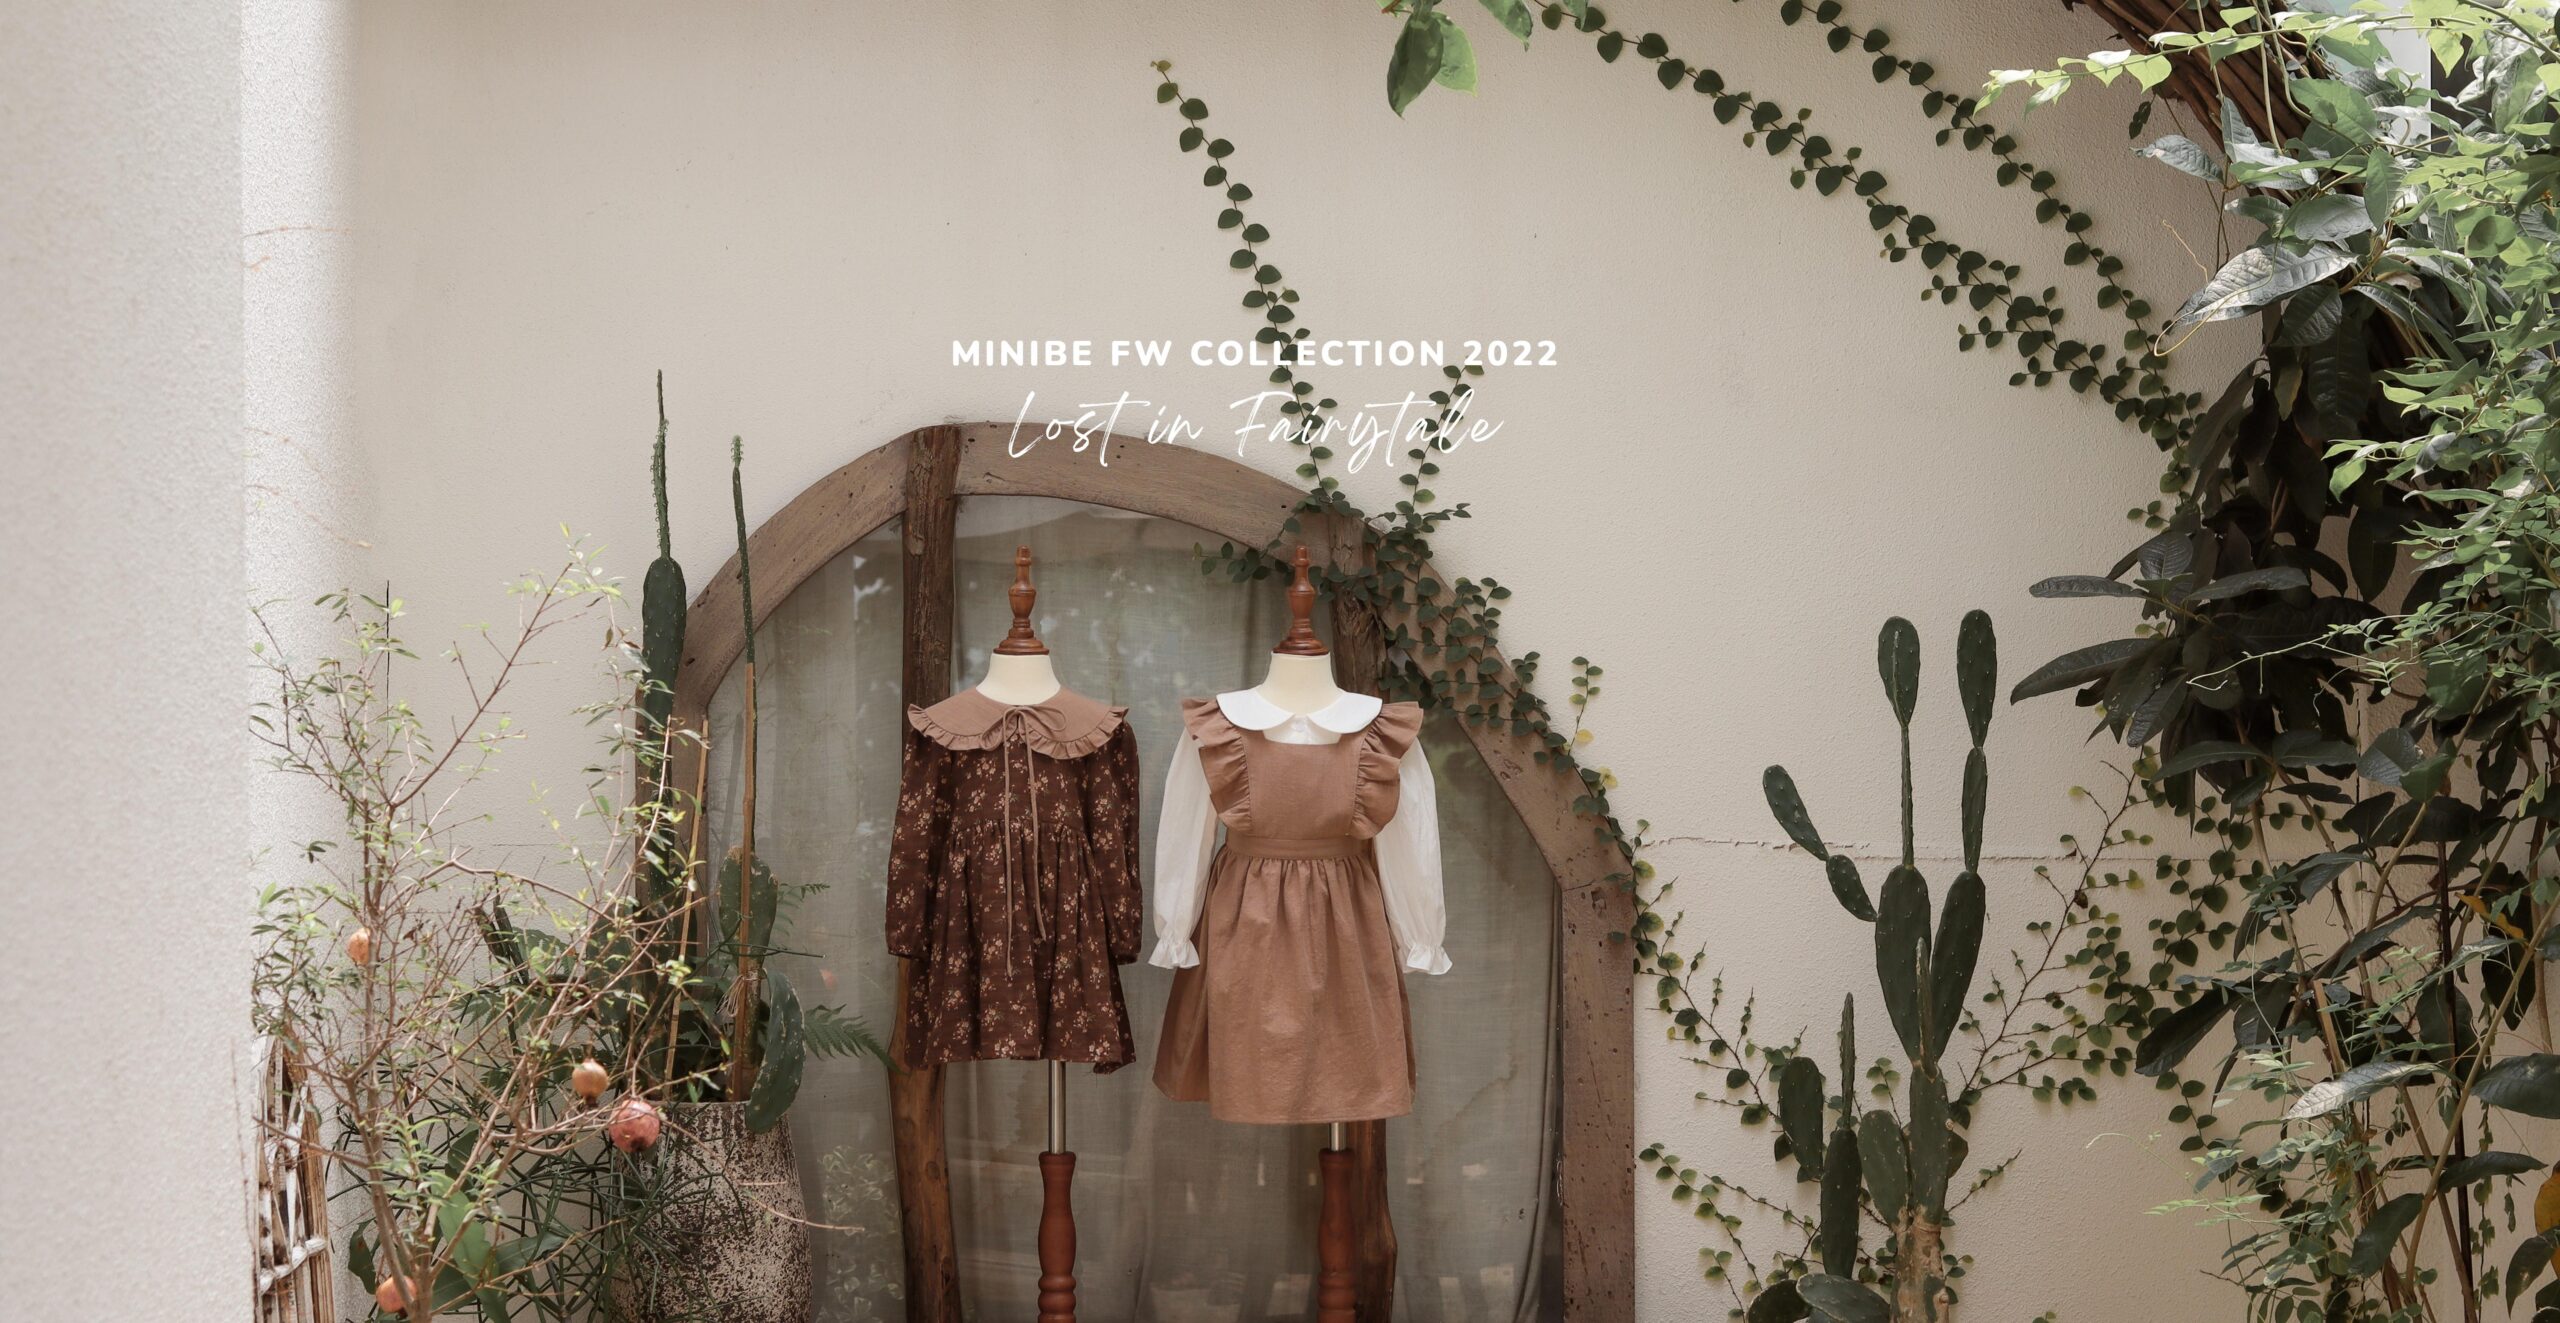 Lost in Fairytale - Minibe FW Collection 2022